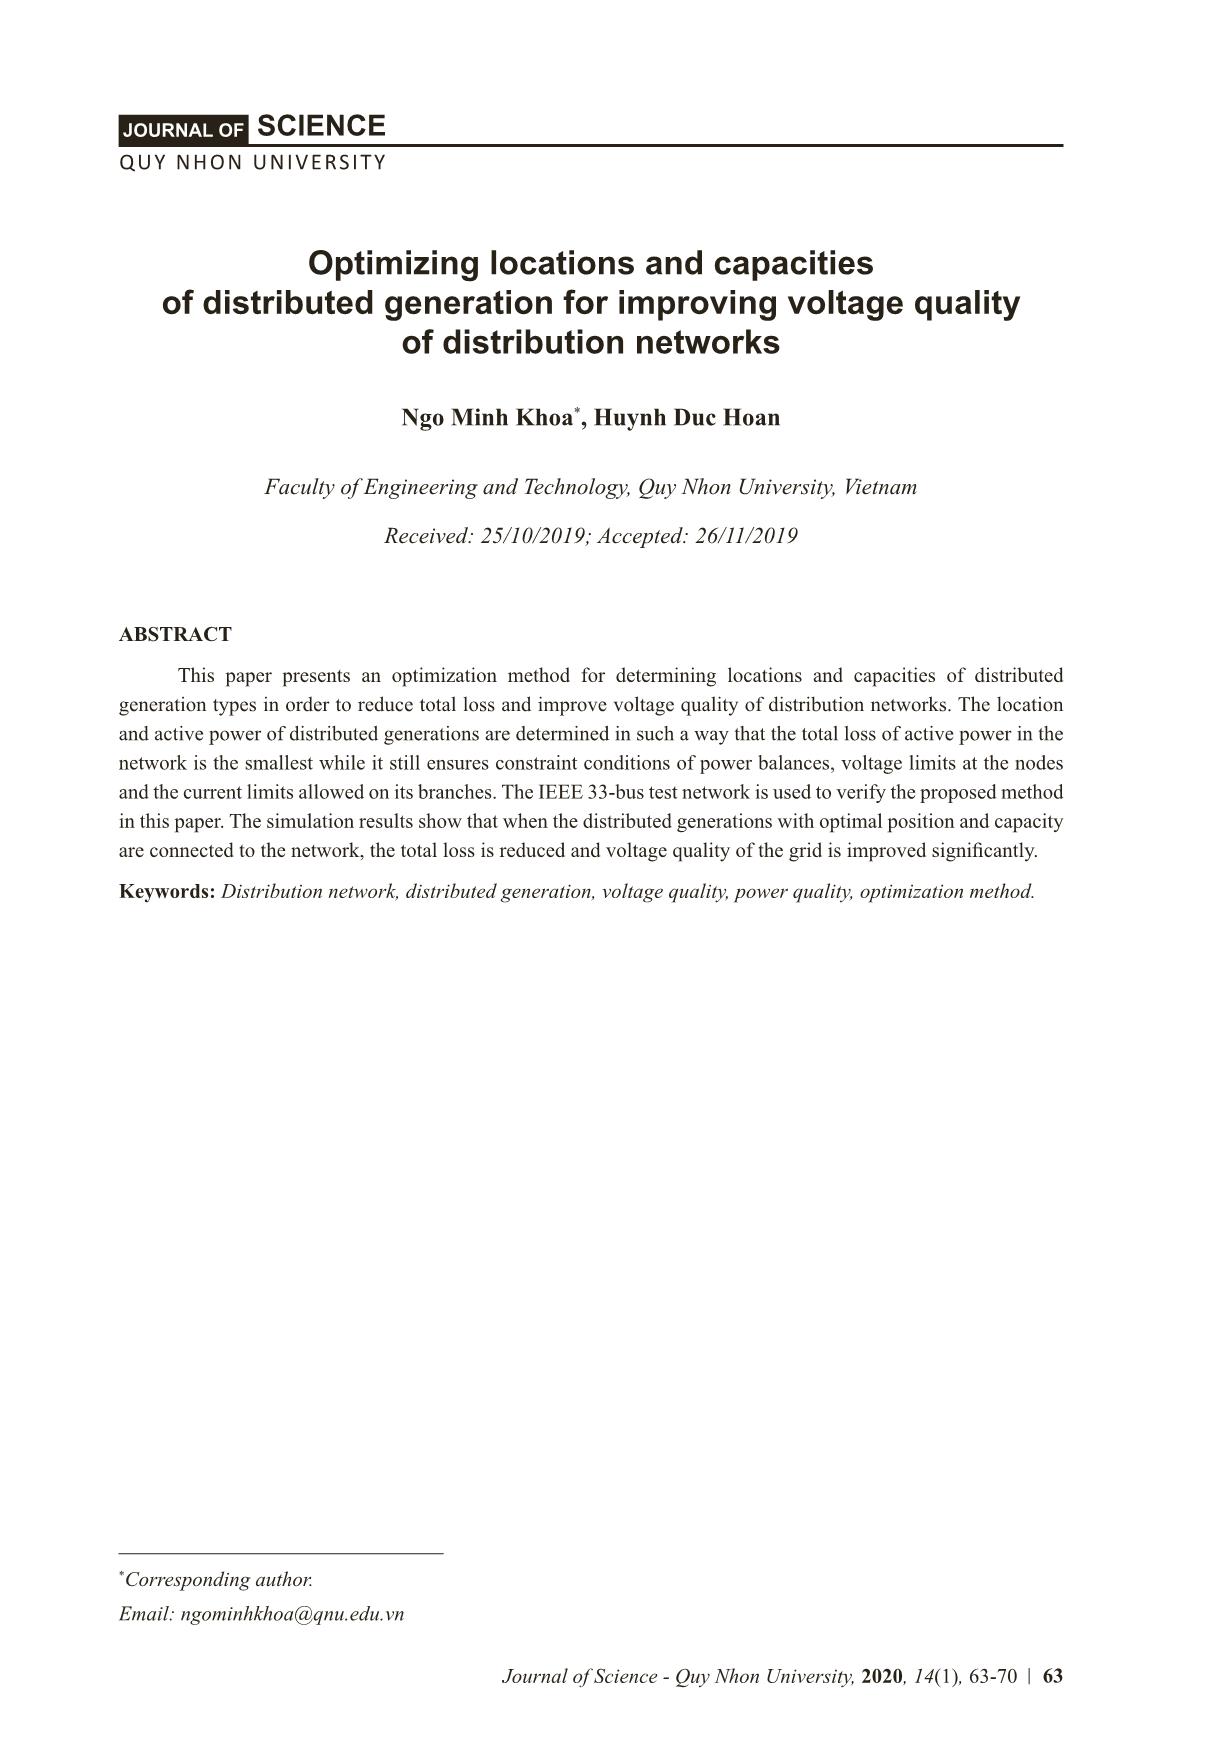 Optimizing locations and capacities of distributed generation for improving voltage quality of distribution networks trang 1